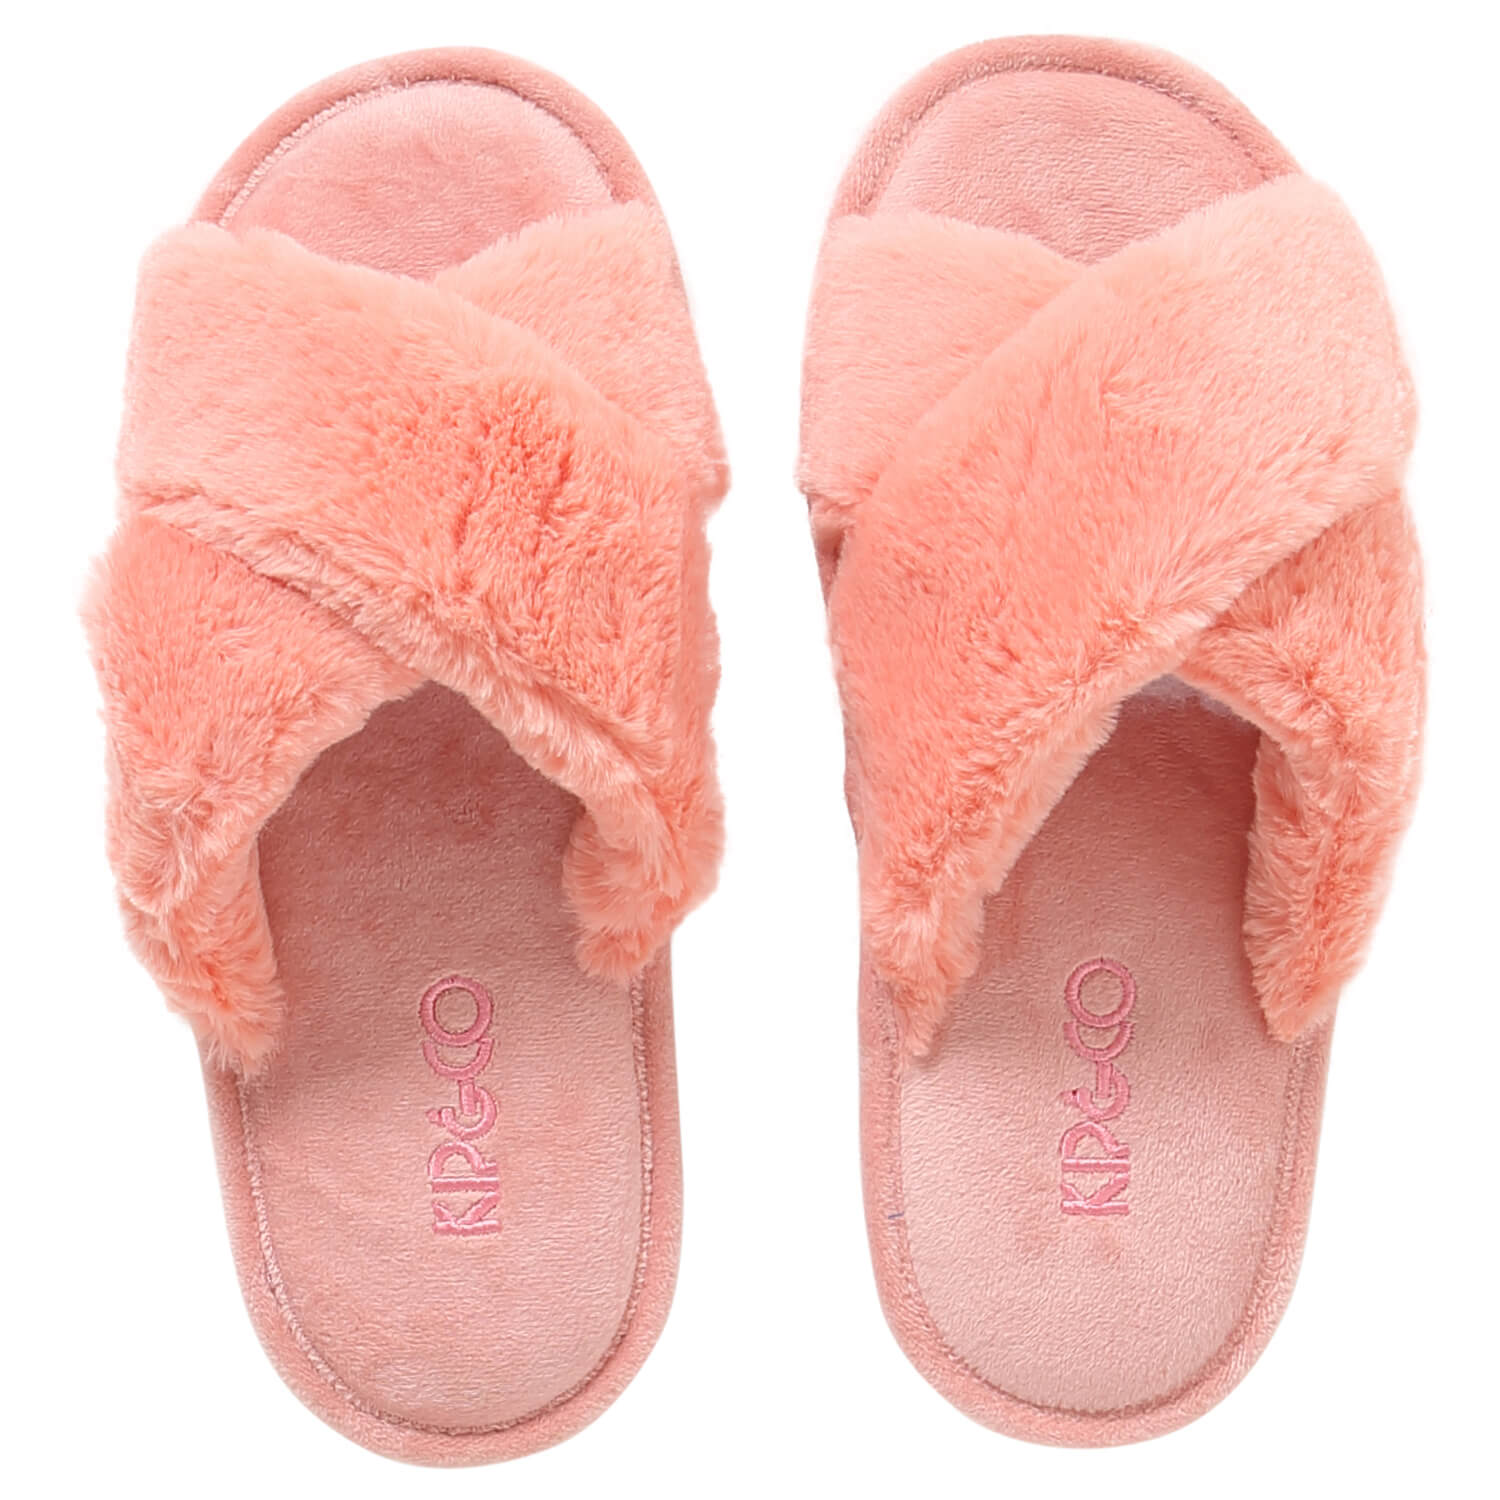 Kip and Co blush pink slippers | The Home Maven